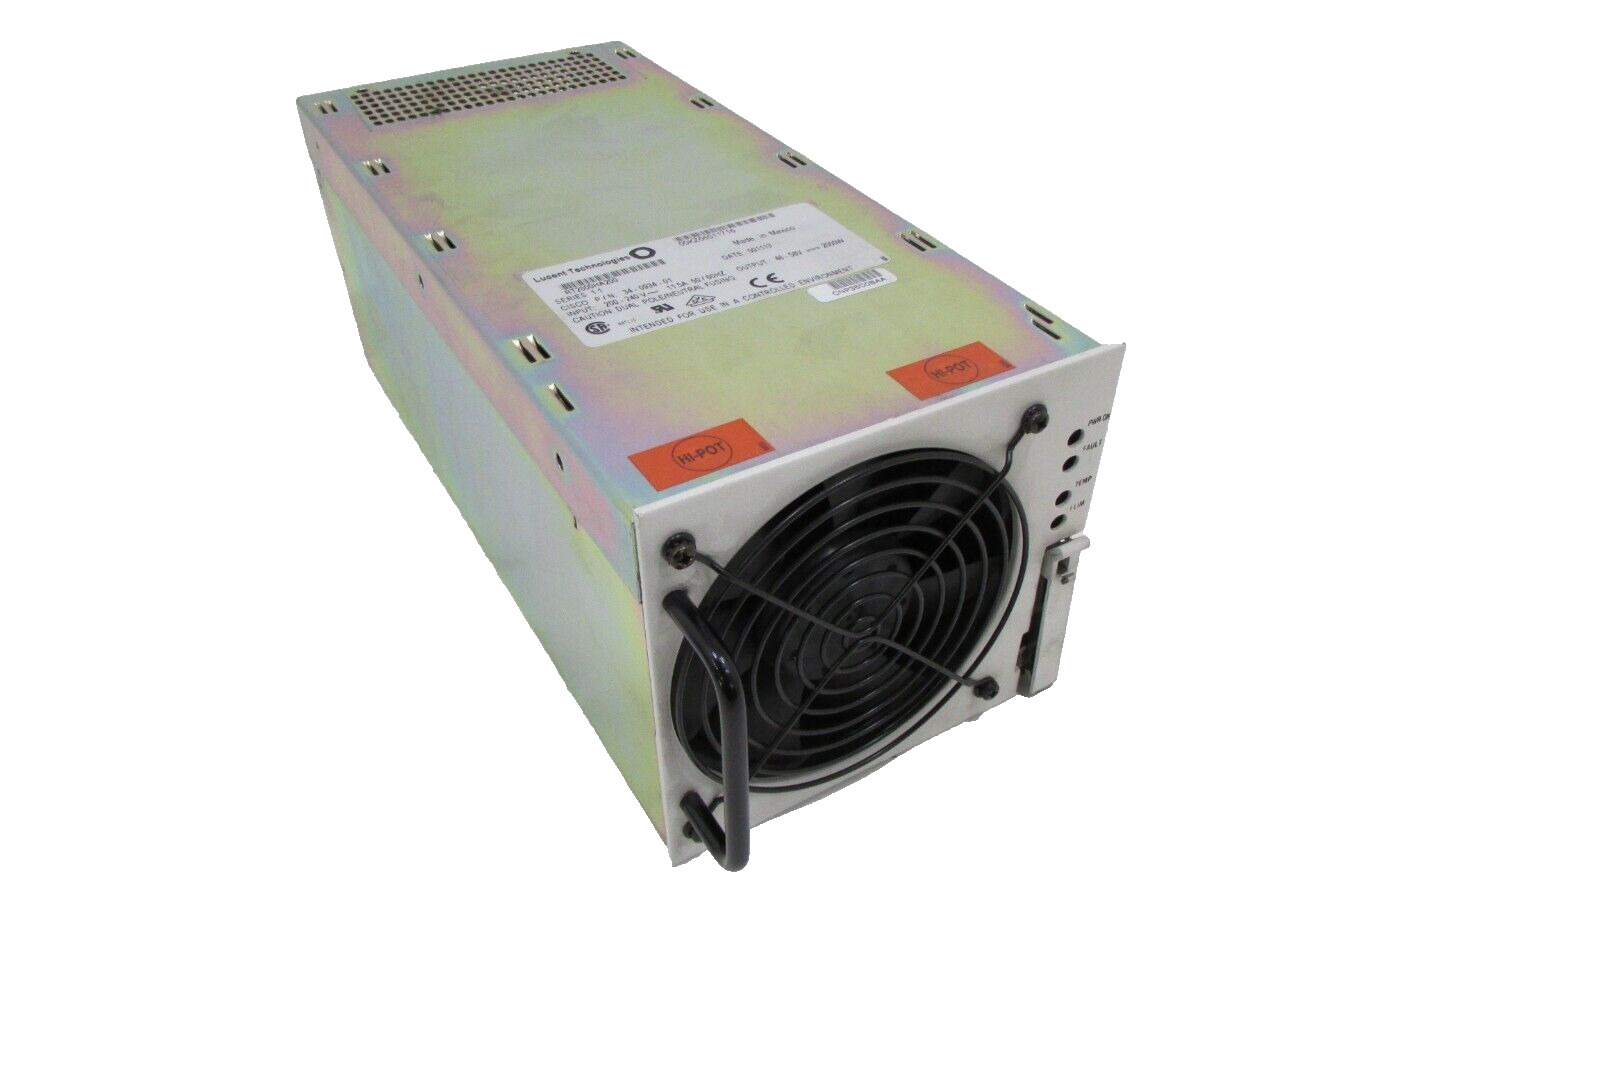 Cisco PWR-GSR16-AC Power Supply for GSR 12000 Chassis